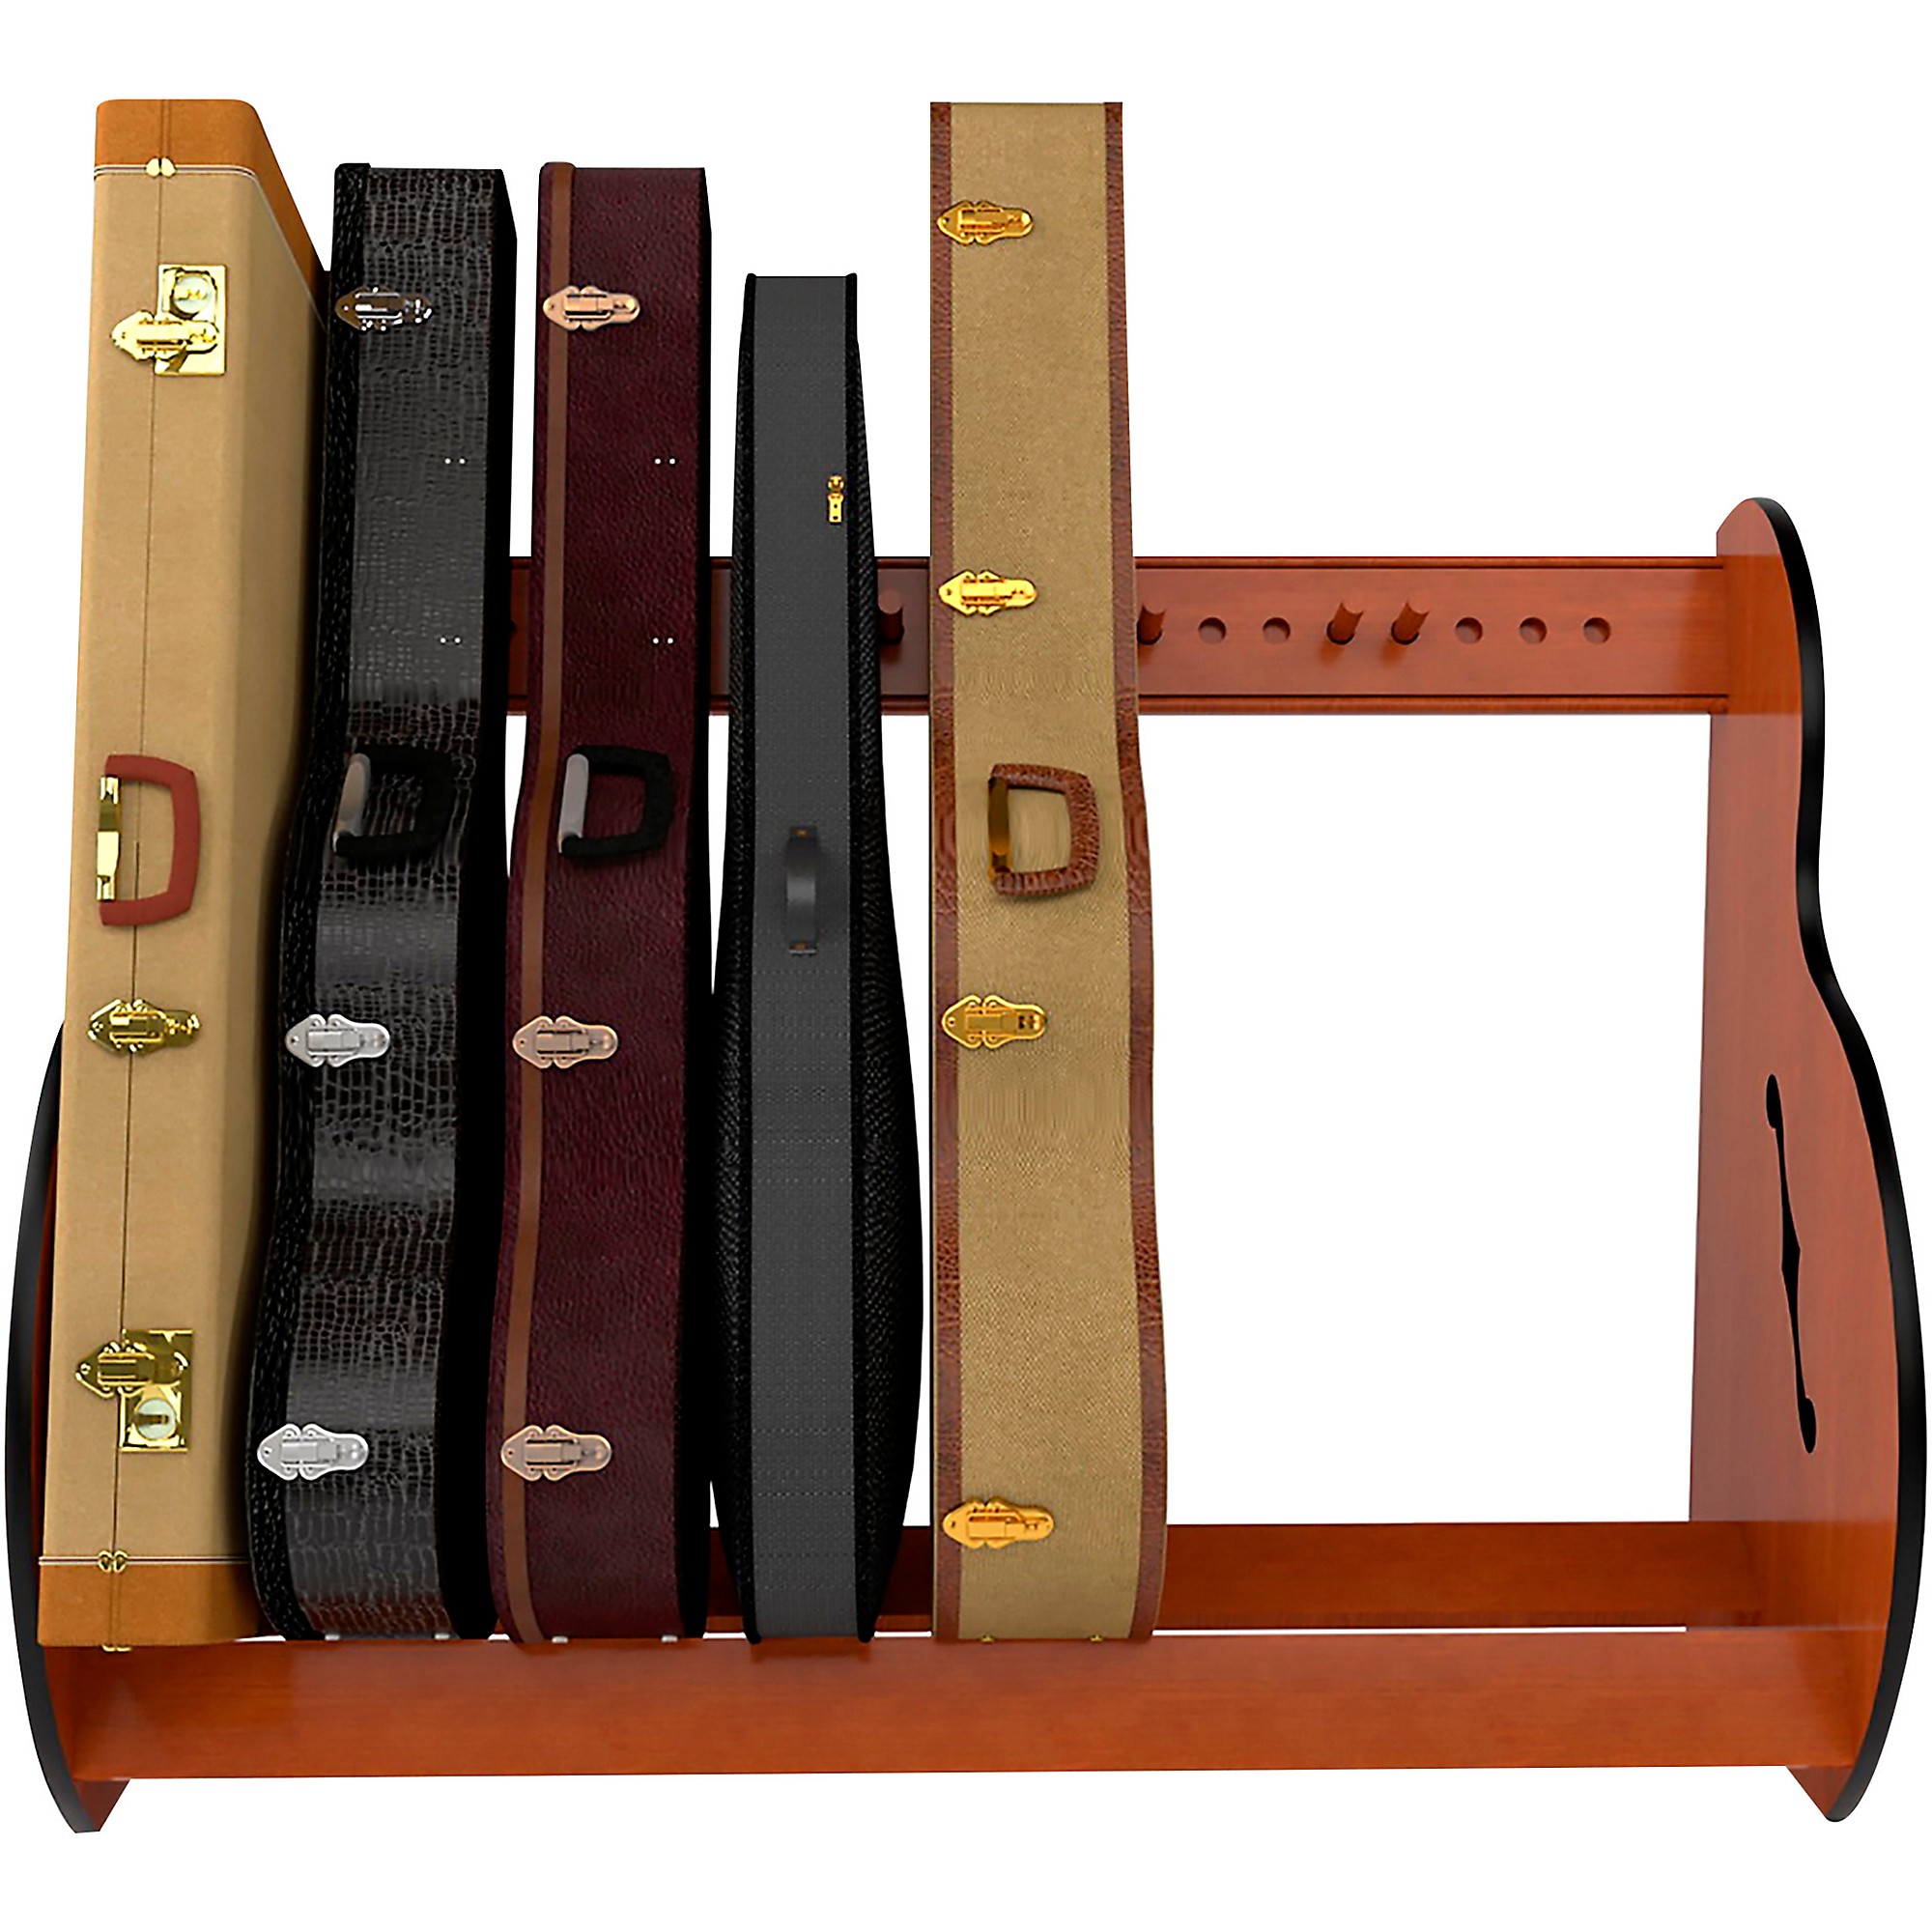 AS Crafted Products Studio Standard Guitar Case Rack Full Size (7-9 Cases)  Guitar Center